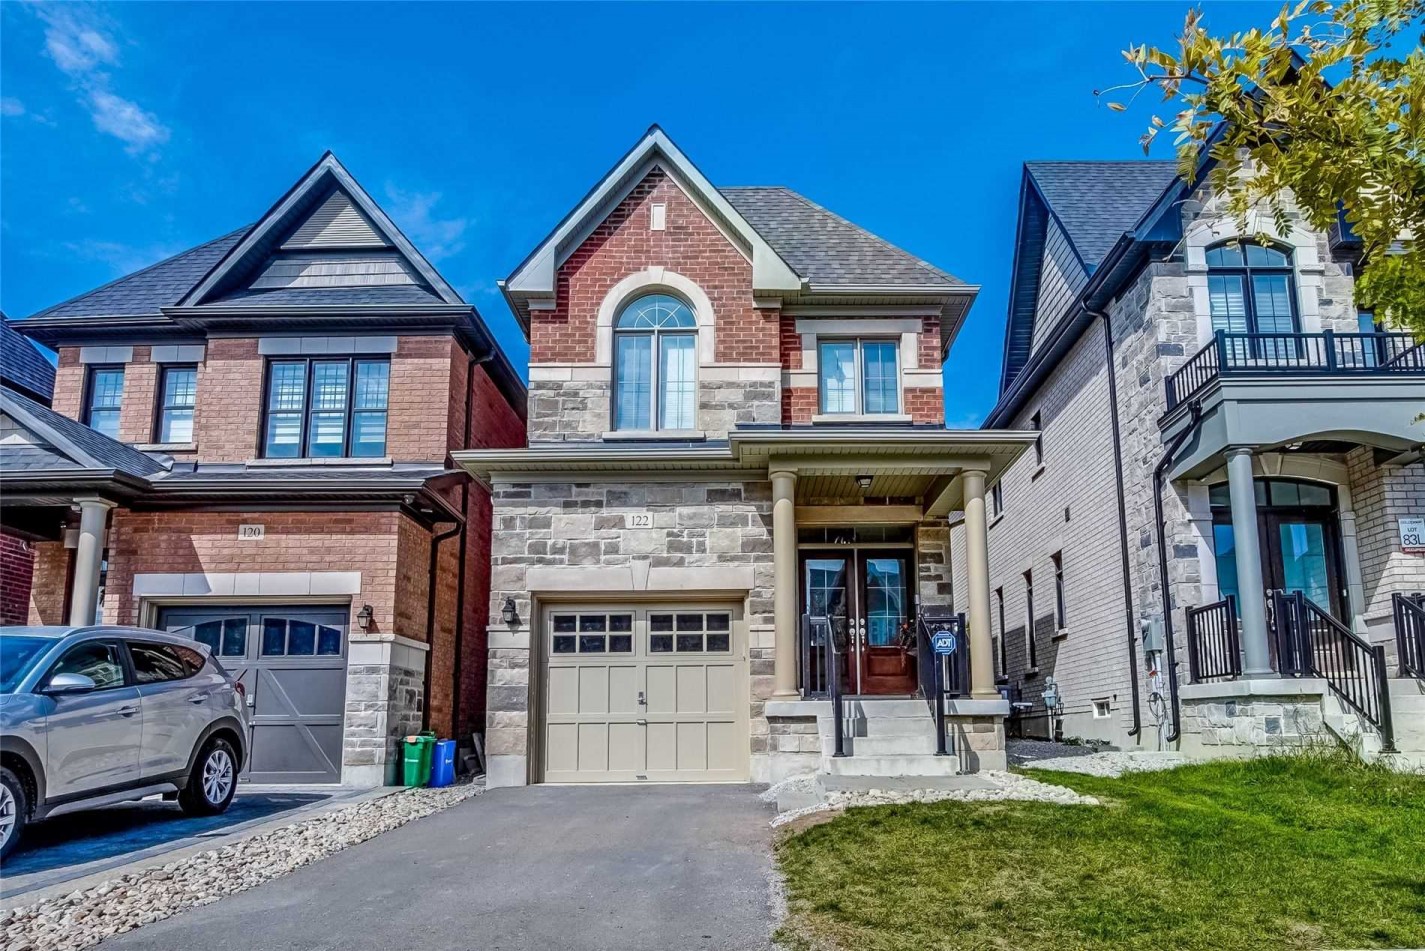 property for sale in kleinburg